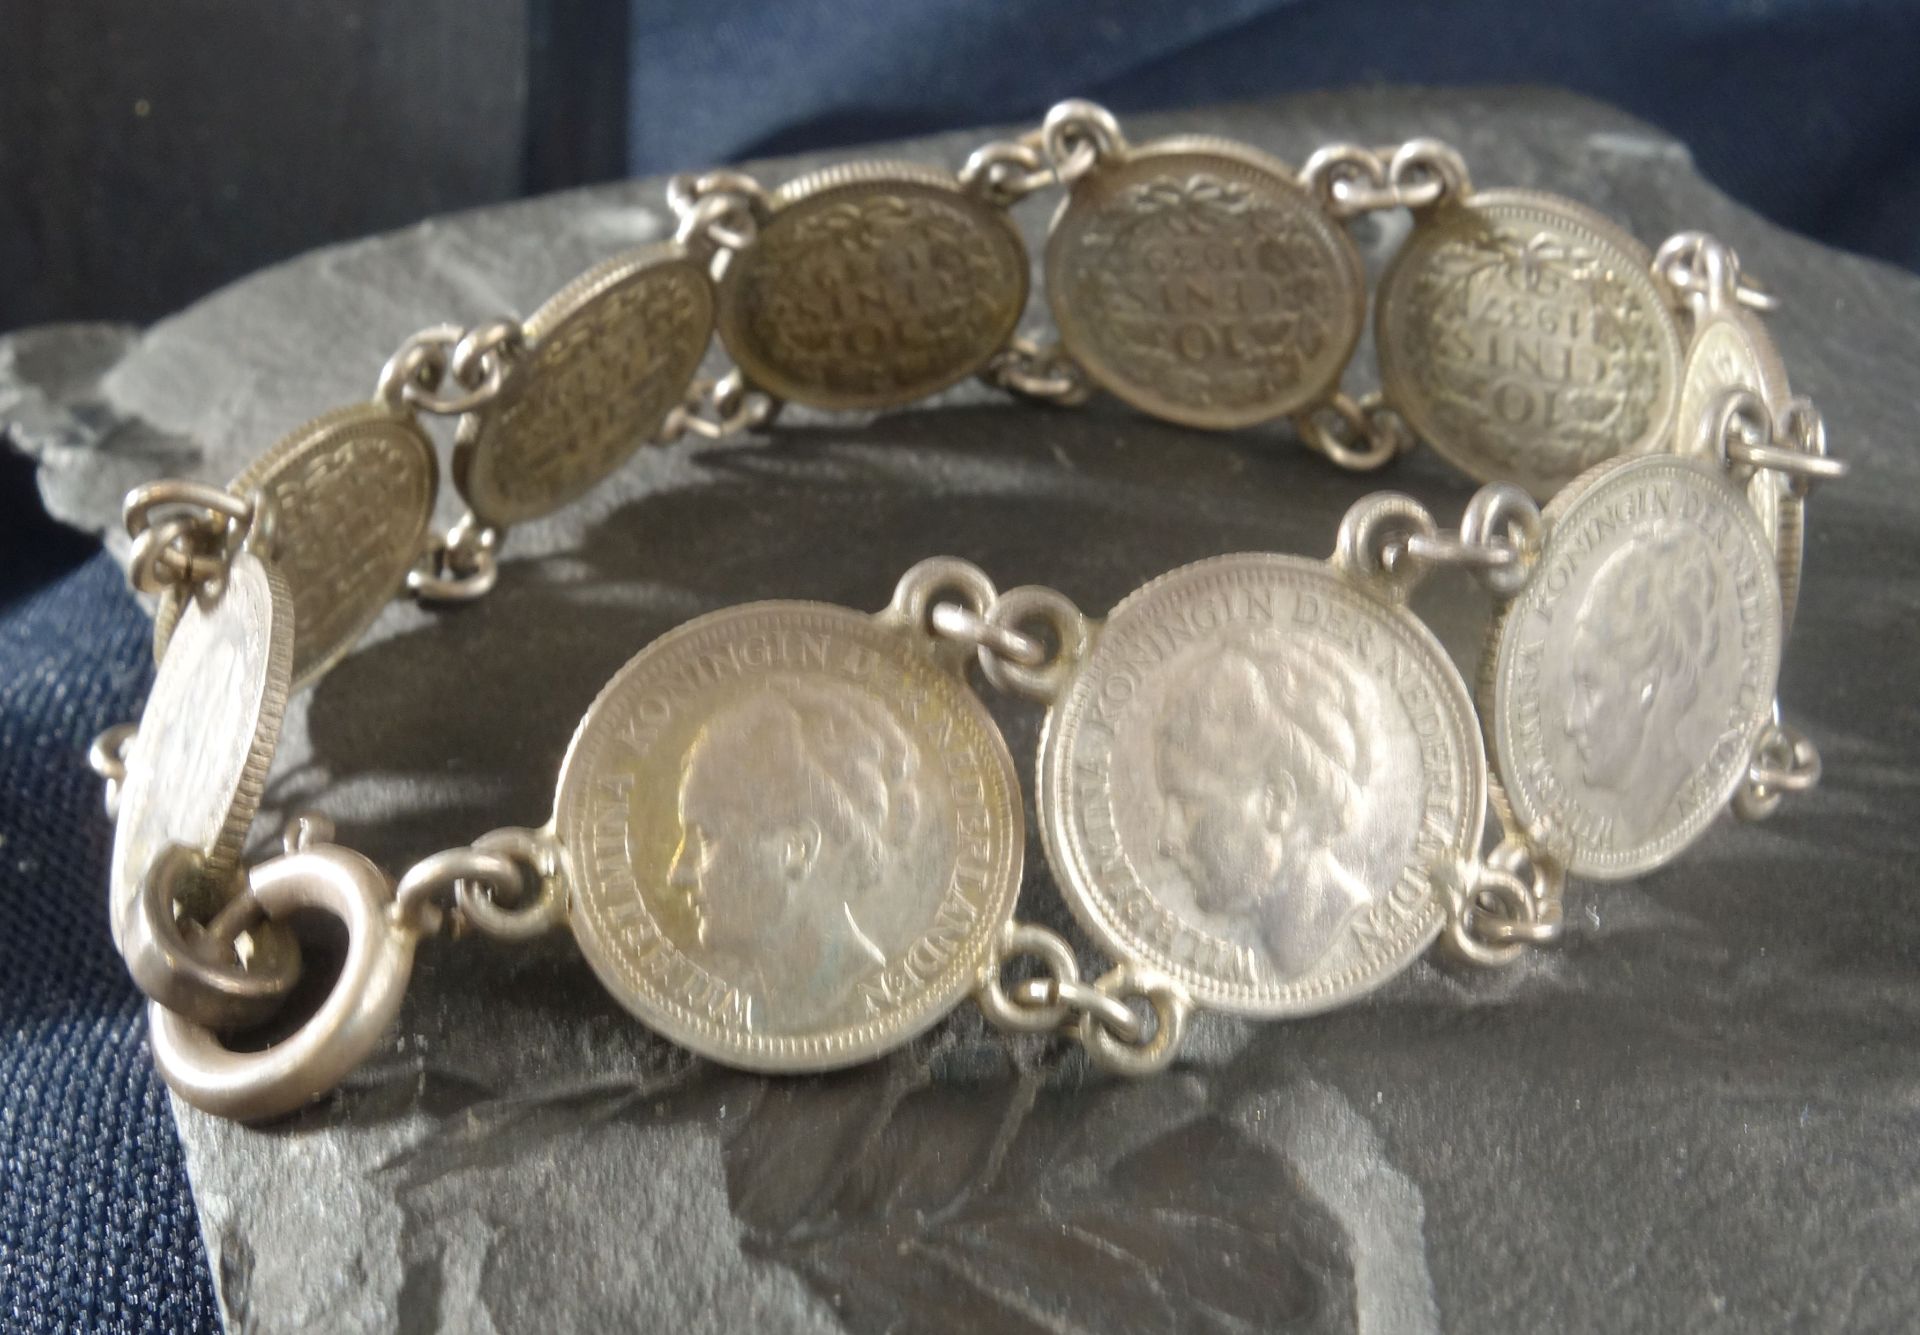 JEWELLERY SET: COIN BRACELET AND COIN NECKLACE - Image 2 of 6